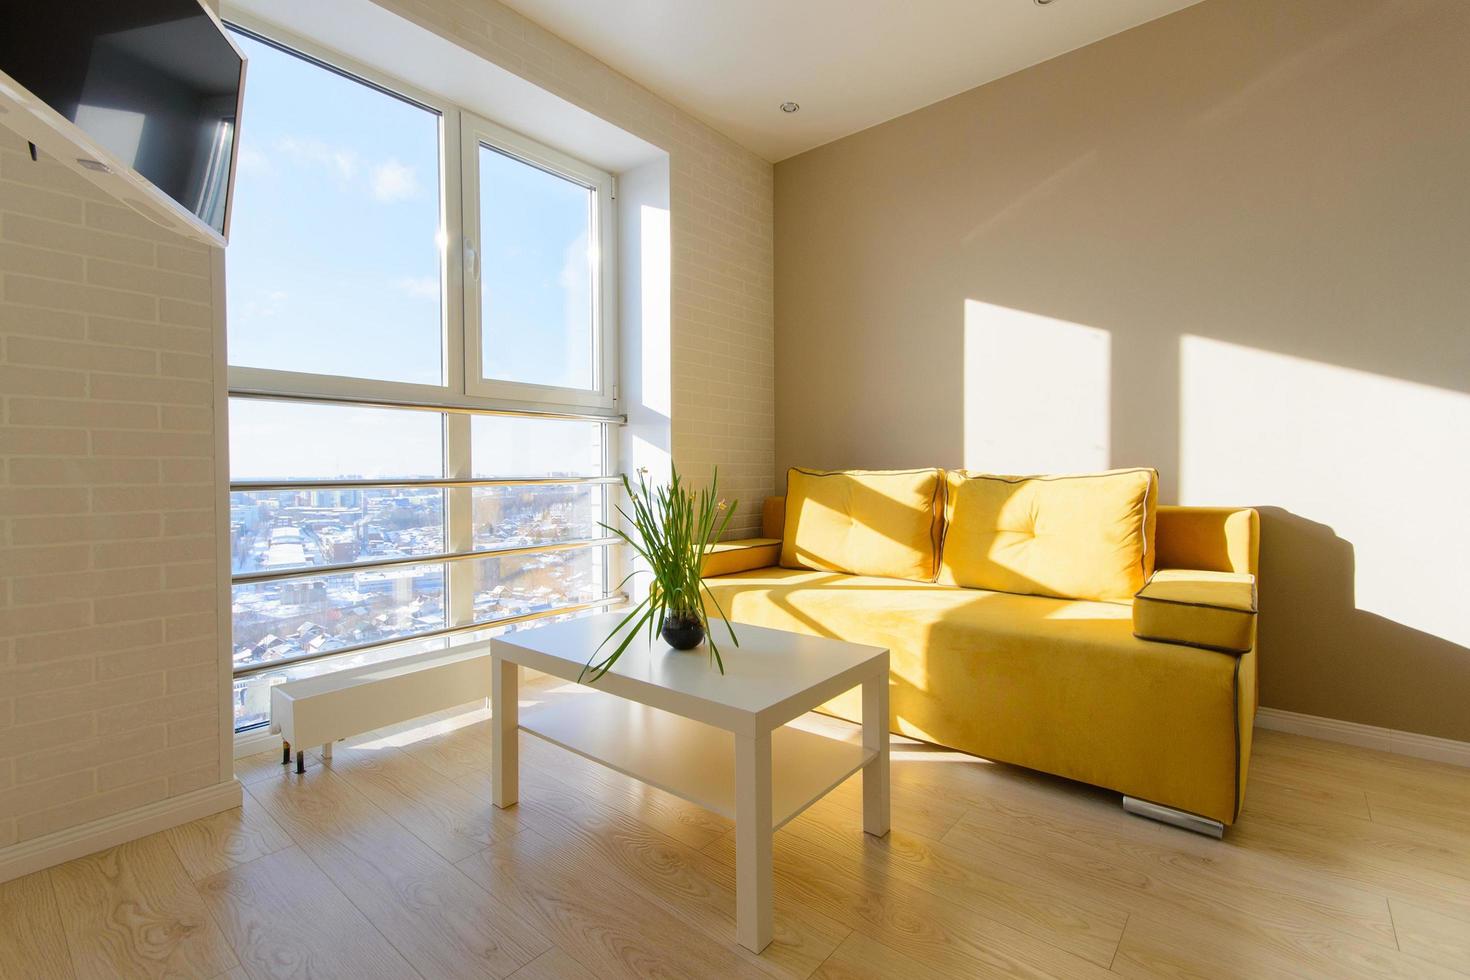 Modern cozy apartment interior, living room with yellow sofa, white coffee table and tv on wall, panoramic window with beautiful view to the city. photo